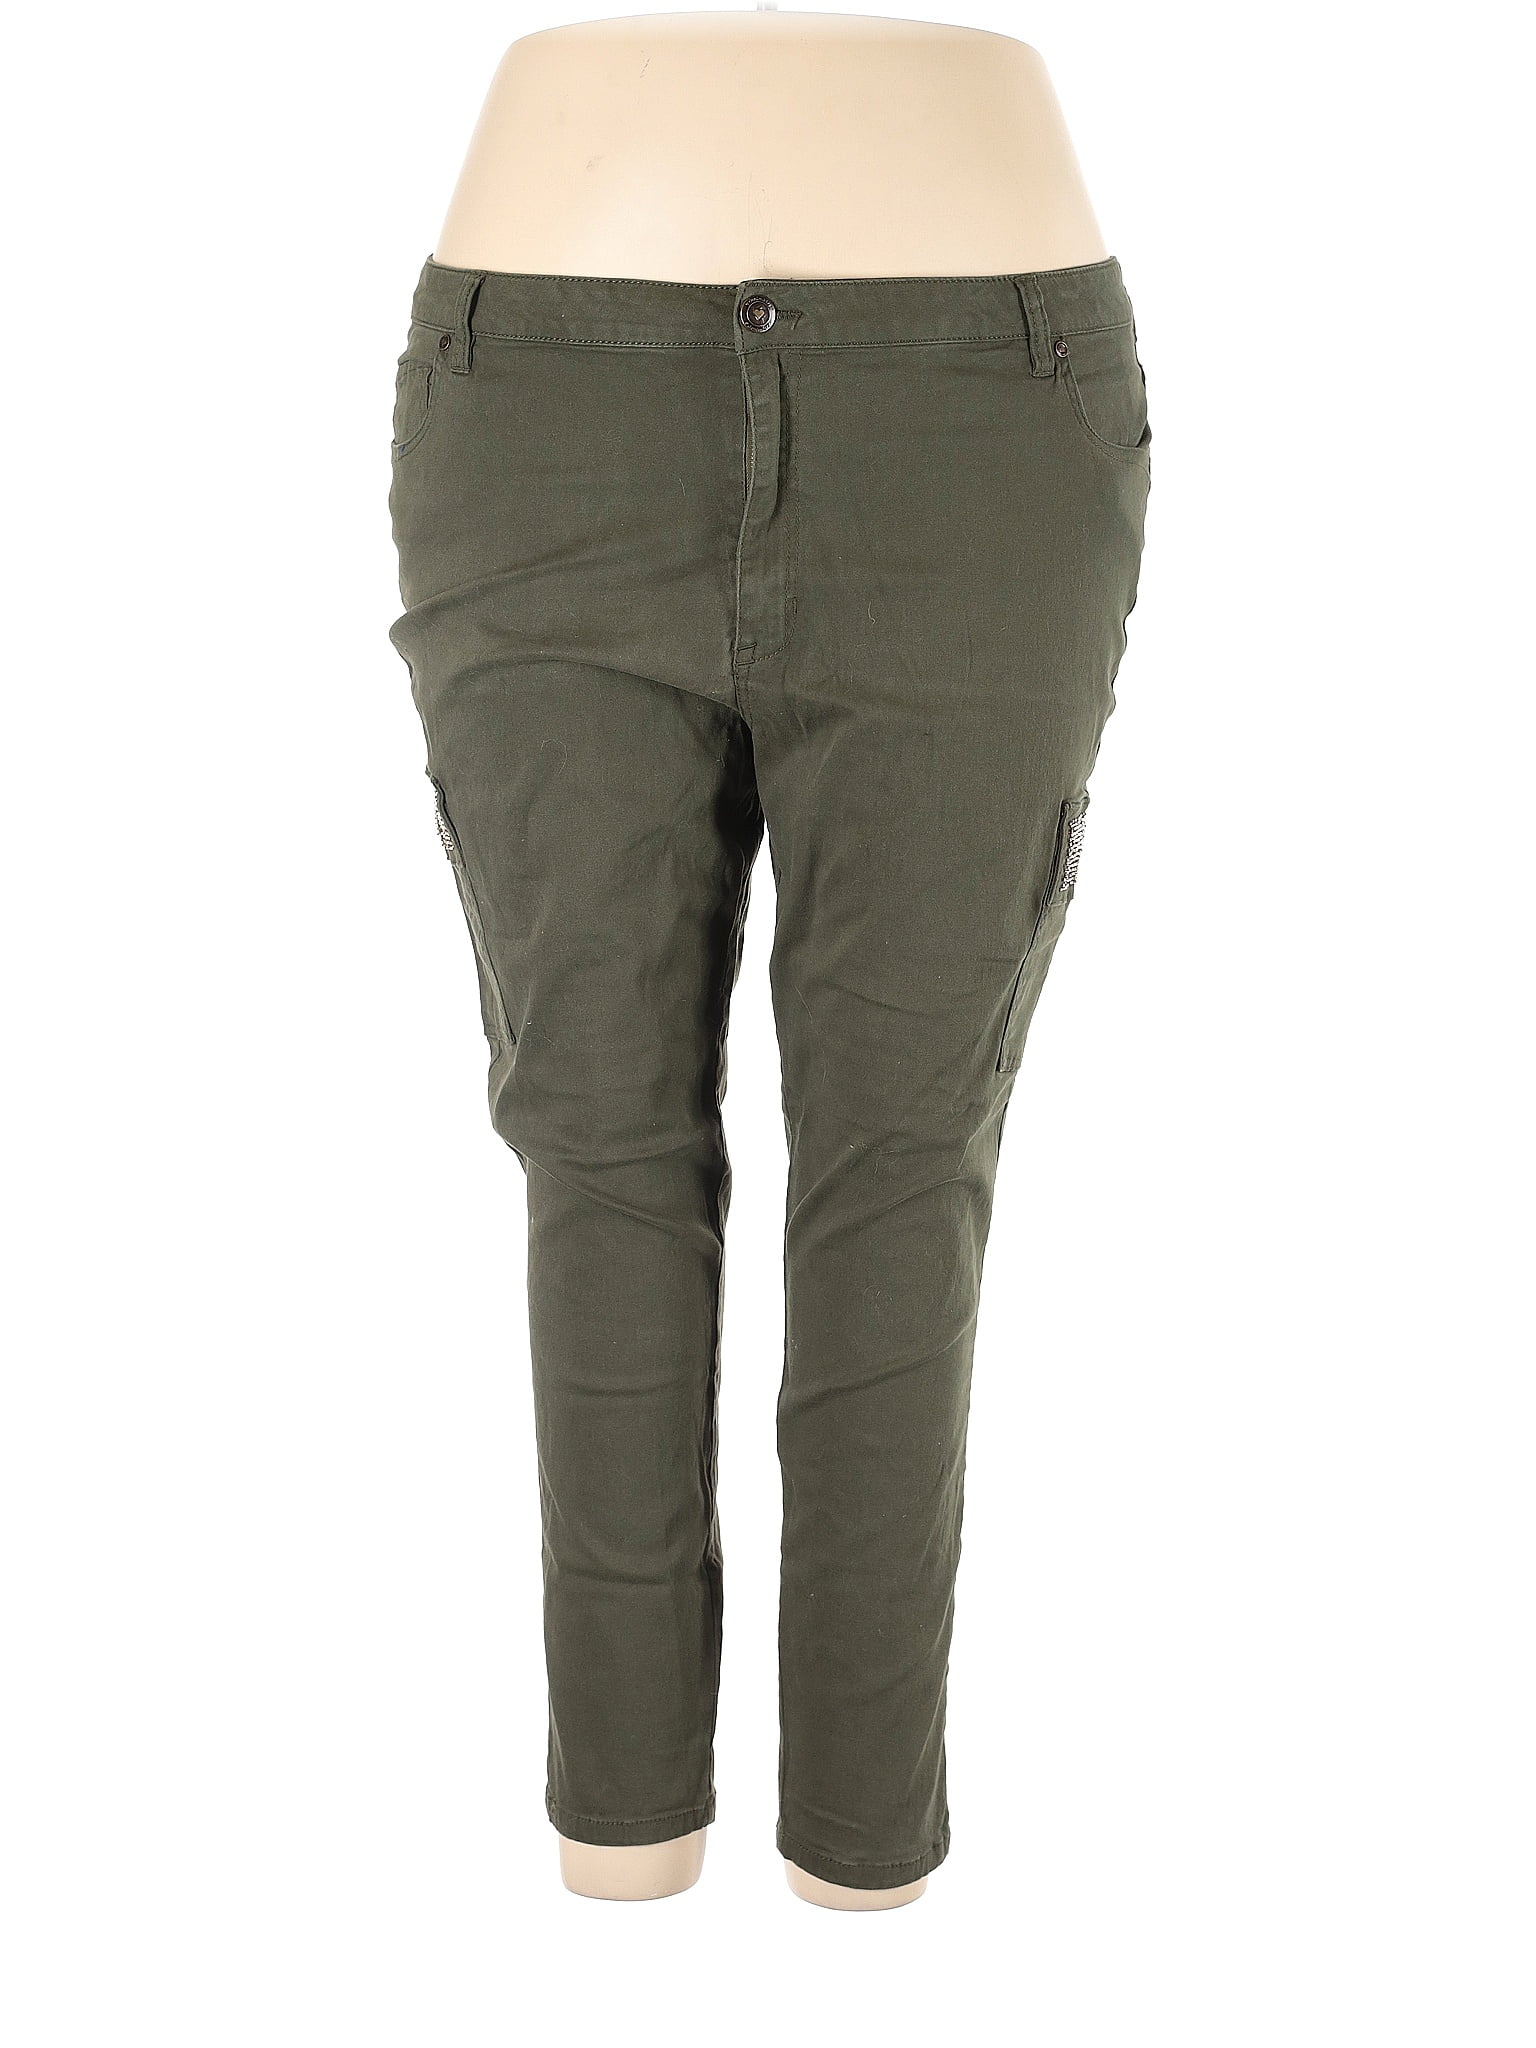 Denim 24/7 Solid Green Jeggings Size 22 (Plus) - 31% off